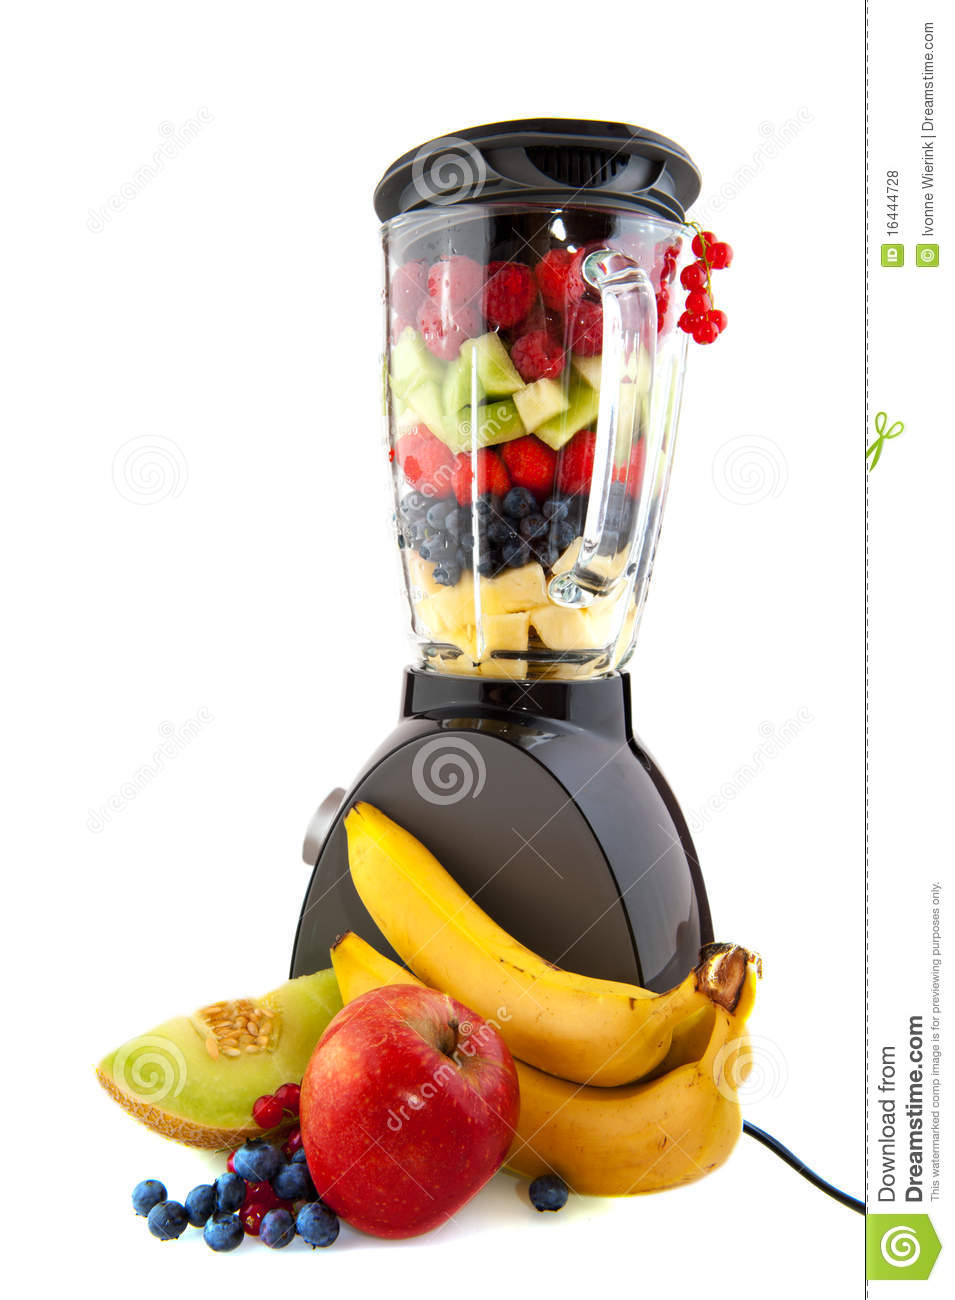 Blender clipart fruit smoothie. Fruity pencil and in